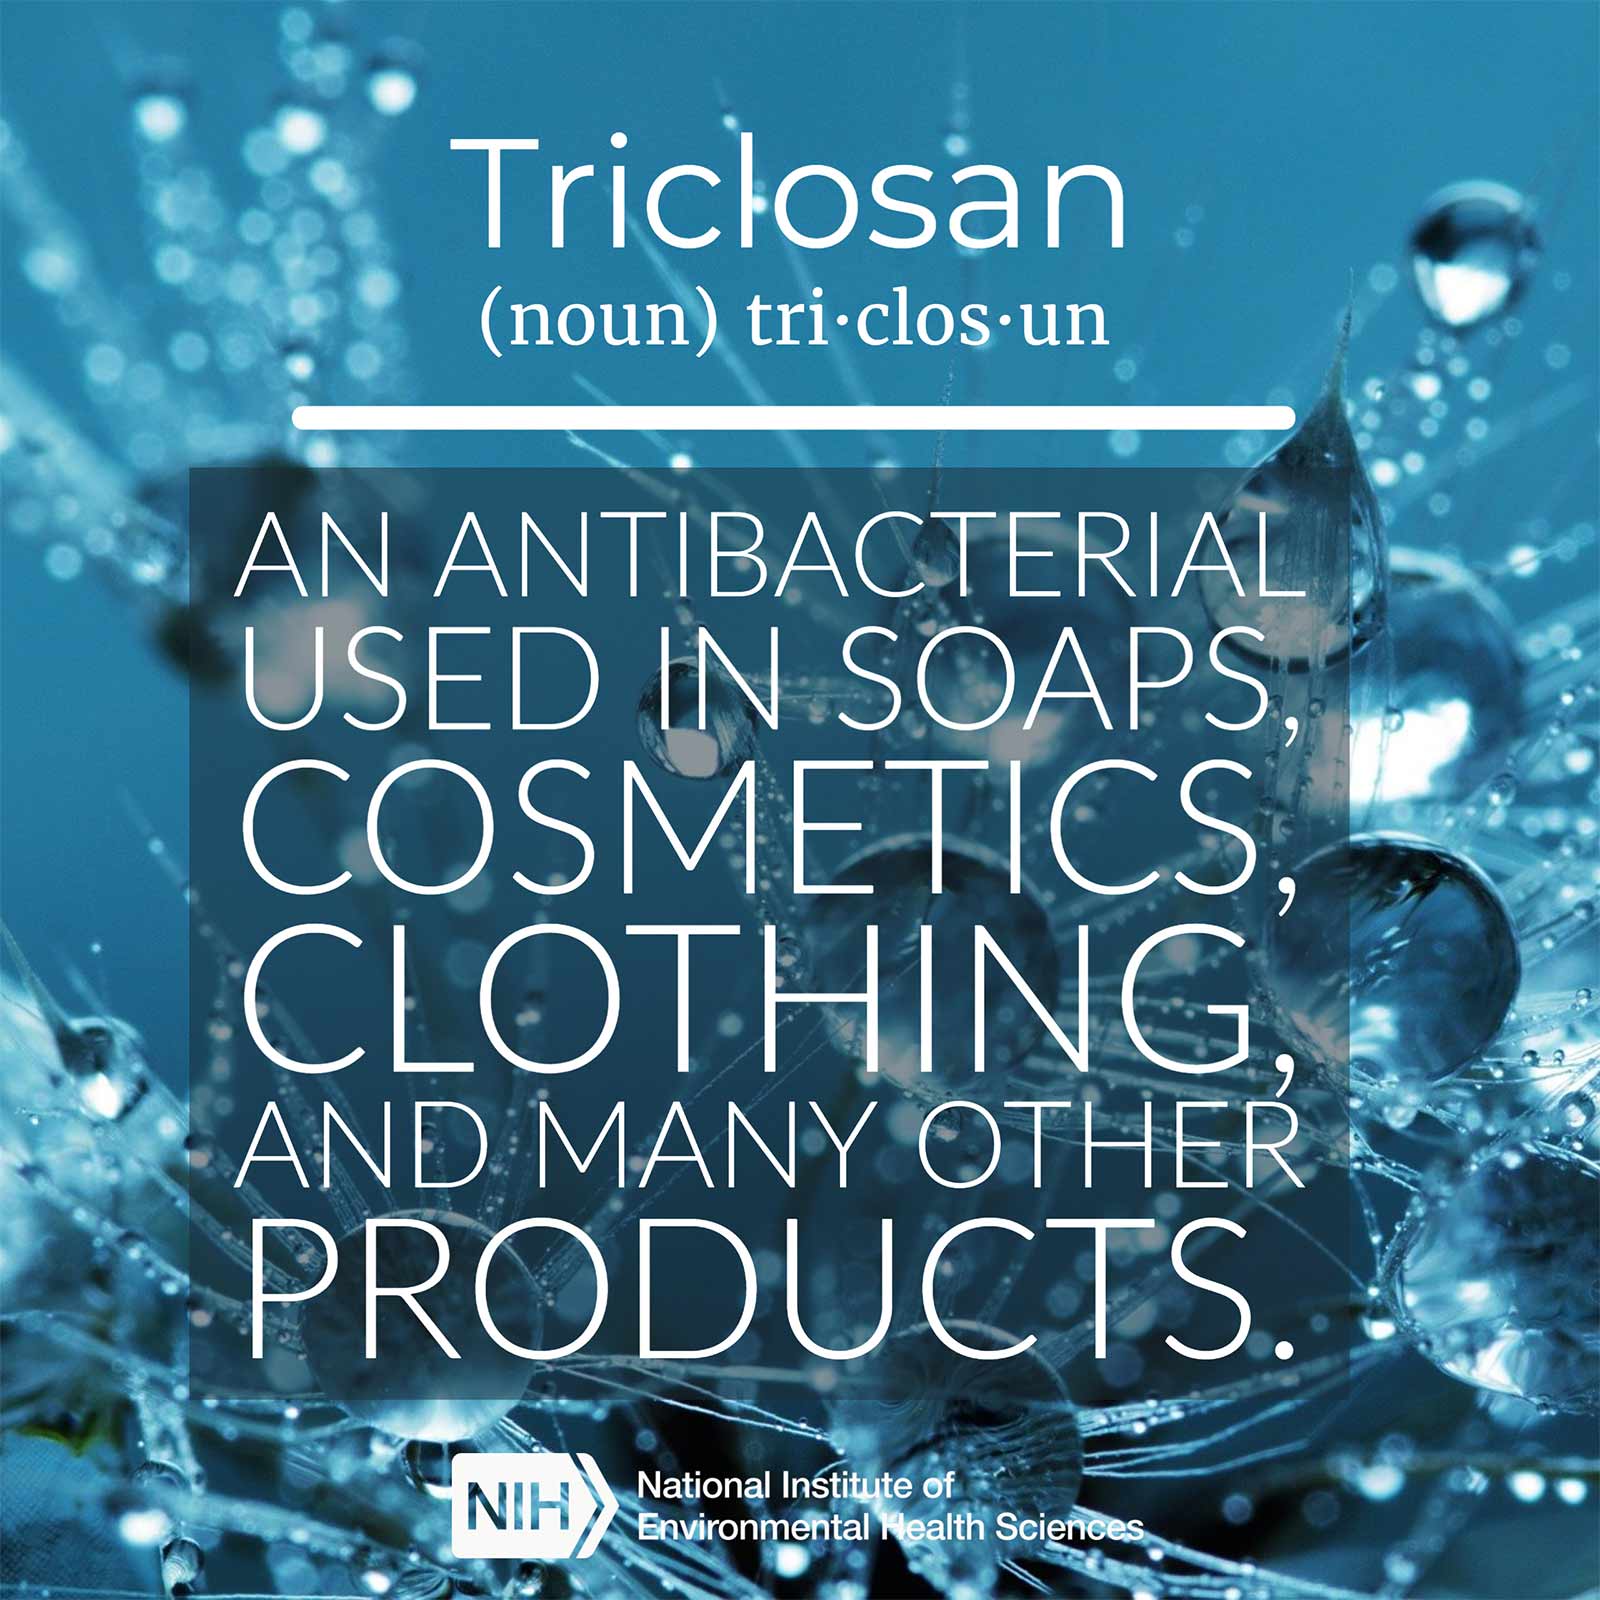 Triclosan (noun) defined as 'an antibacterial used in soaps, cosmetics, clothing, and many other products.'